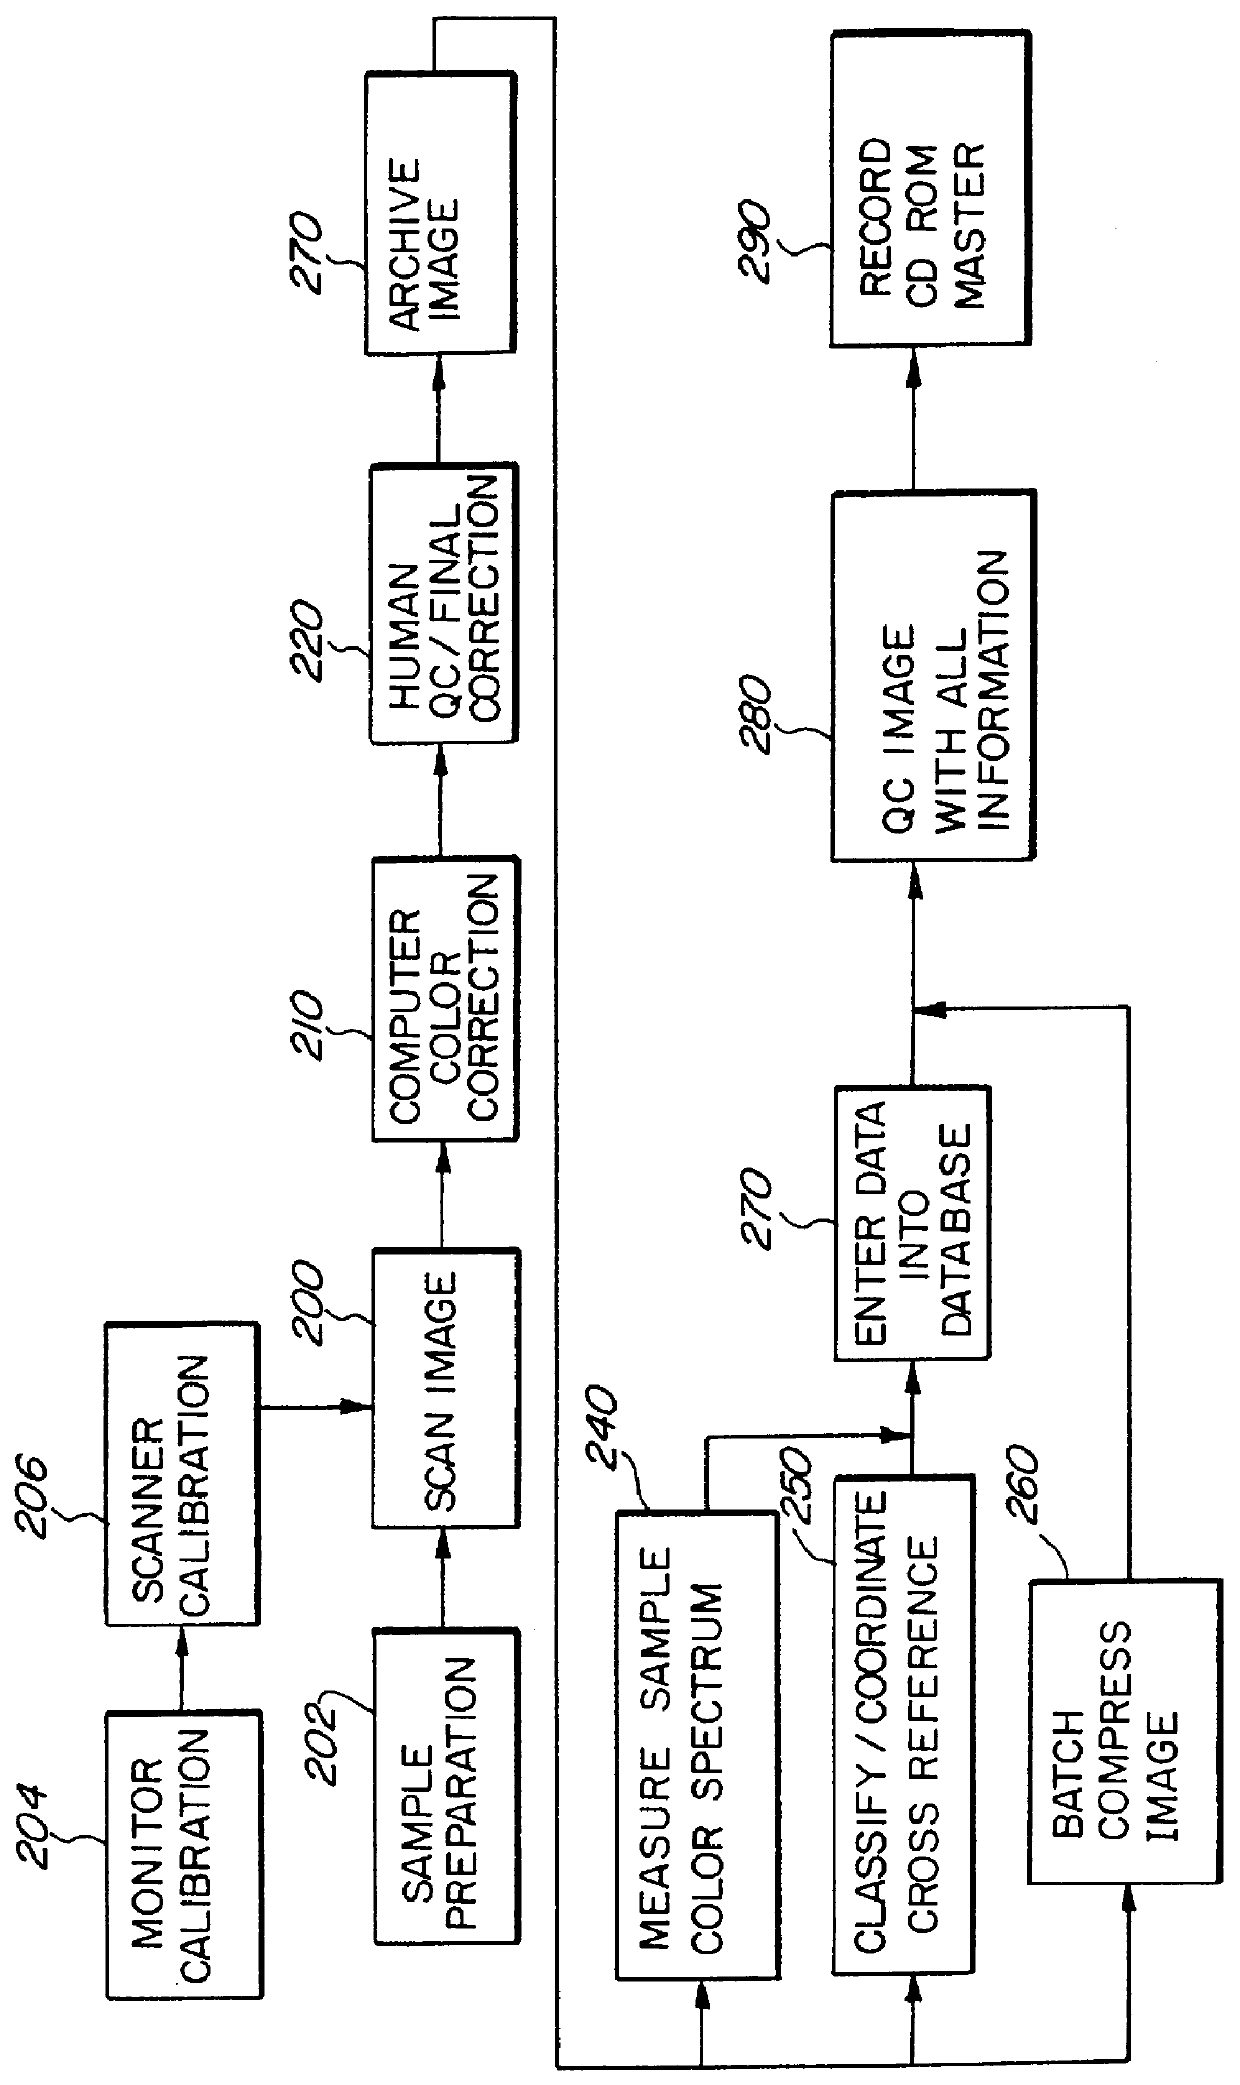 Spectrally coordinated pattern search-imaging system and method